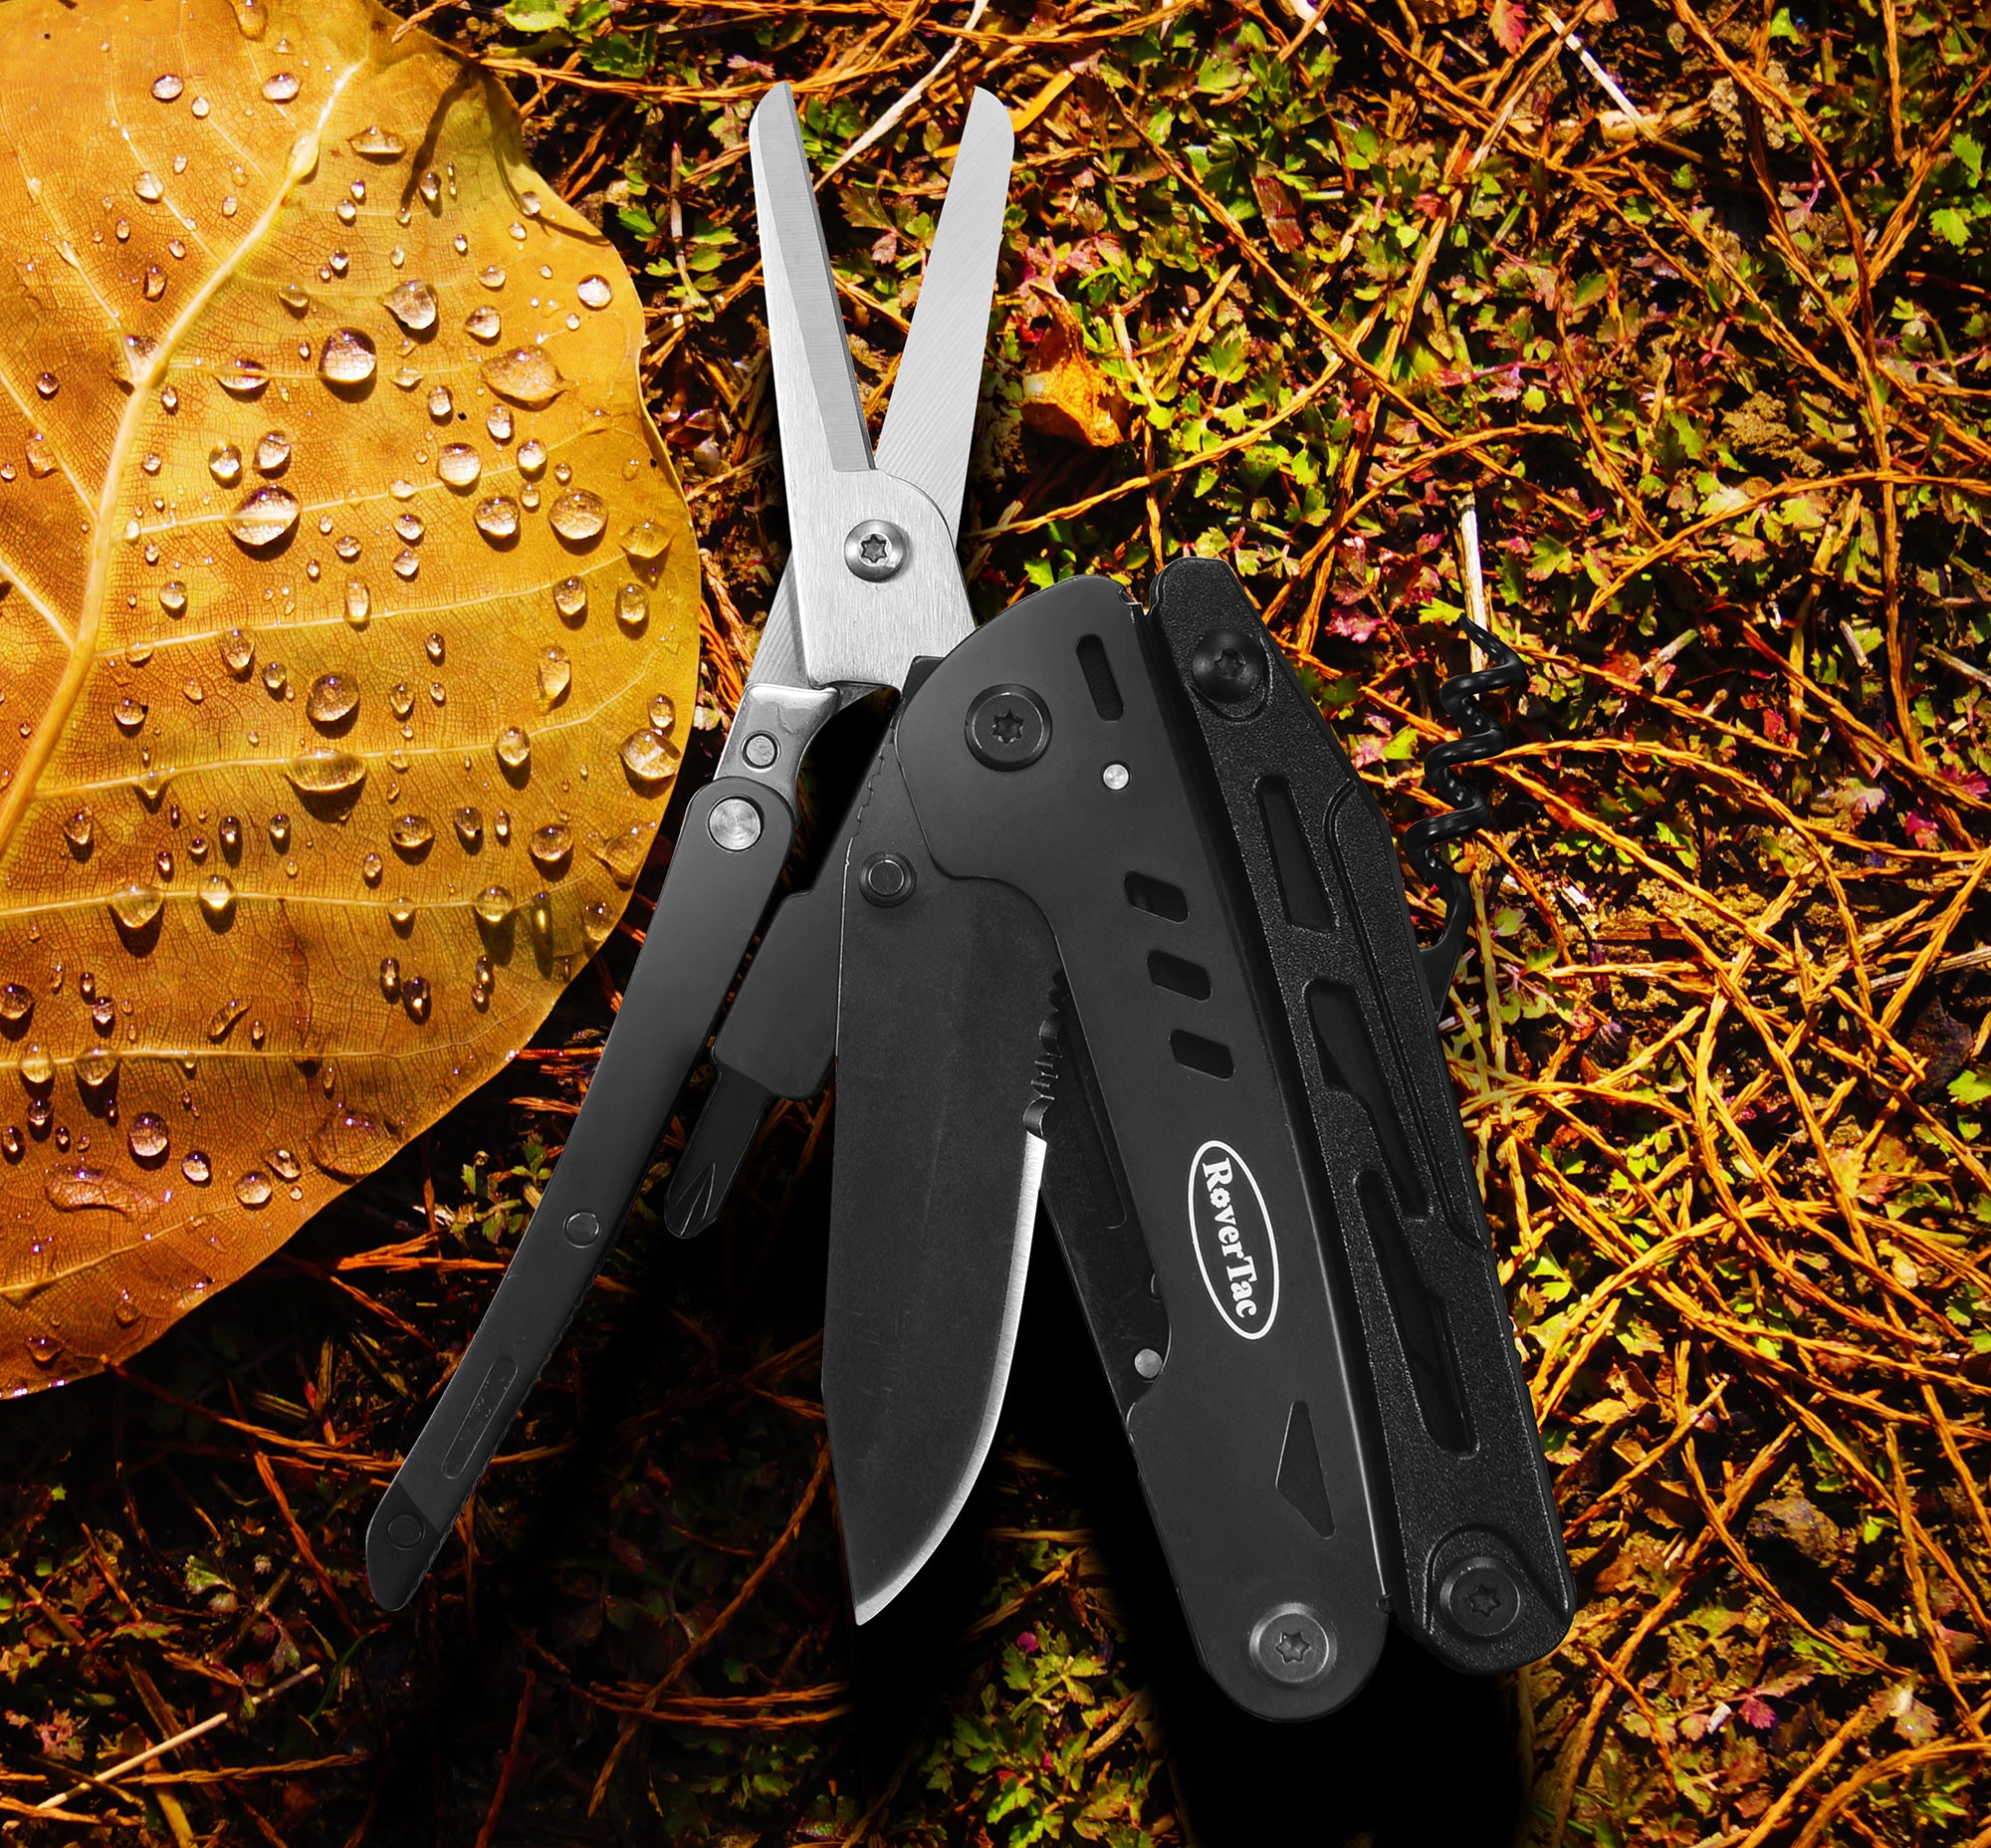 RoverTac Multitool Knife Camping Survival Knife Unique Gifts for Men Dad Husband 18 in 1 Multitools Knife Pliers Scissors Saw Corkscrew Bottle Opener 9-Pack Screwdrivers with Safety Lock Nylon Sheath